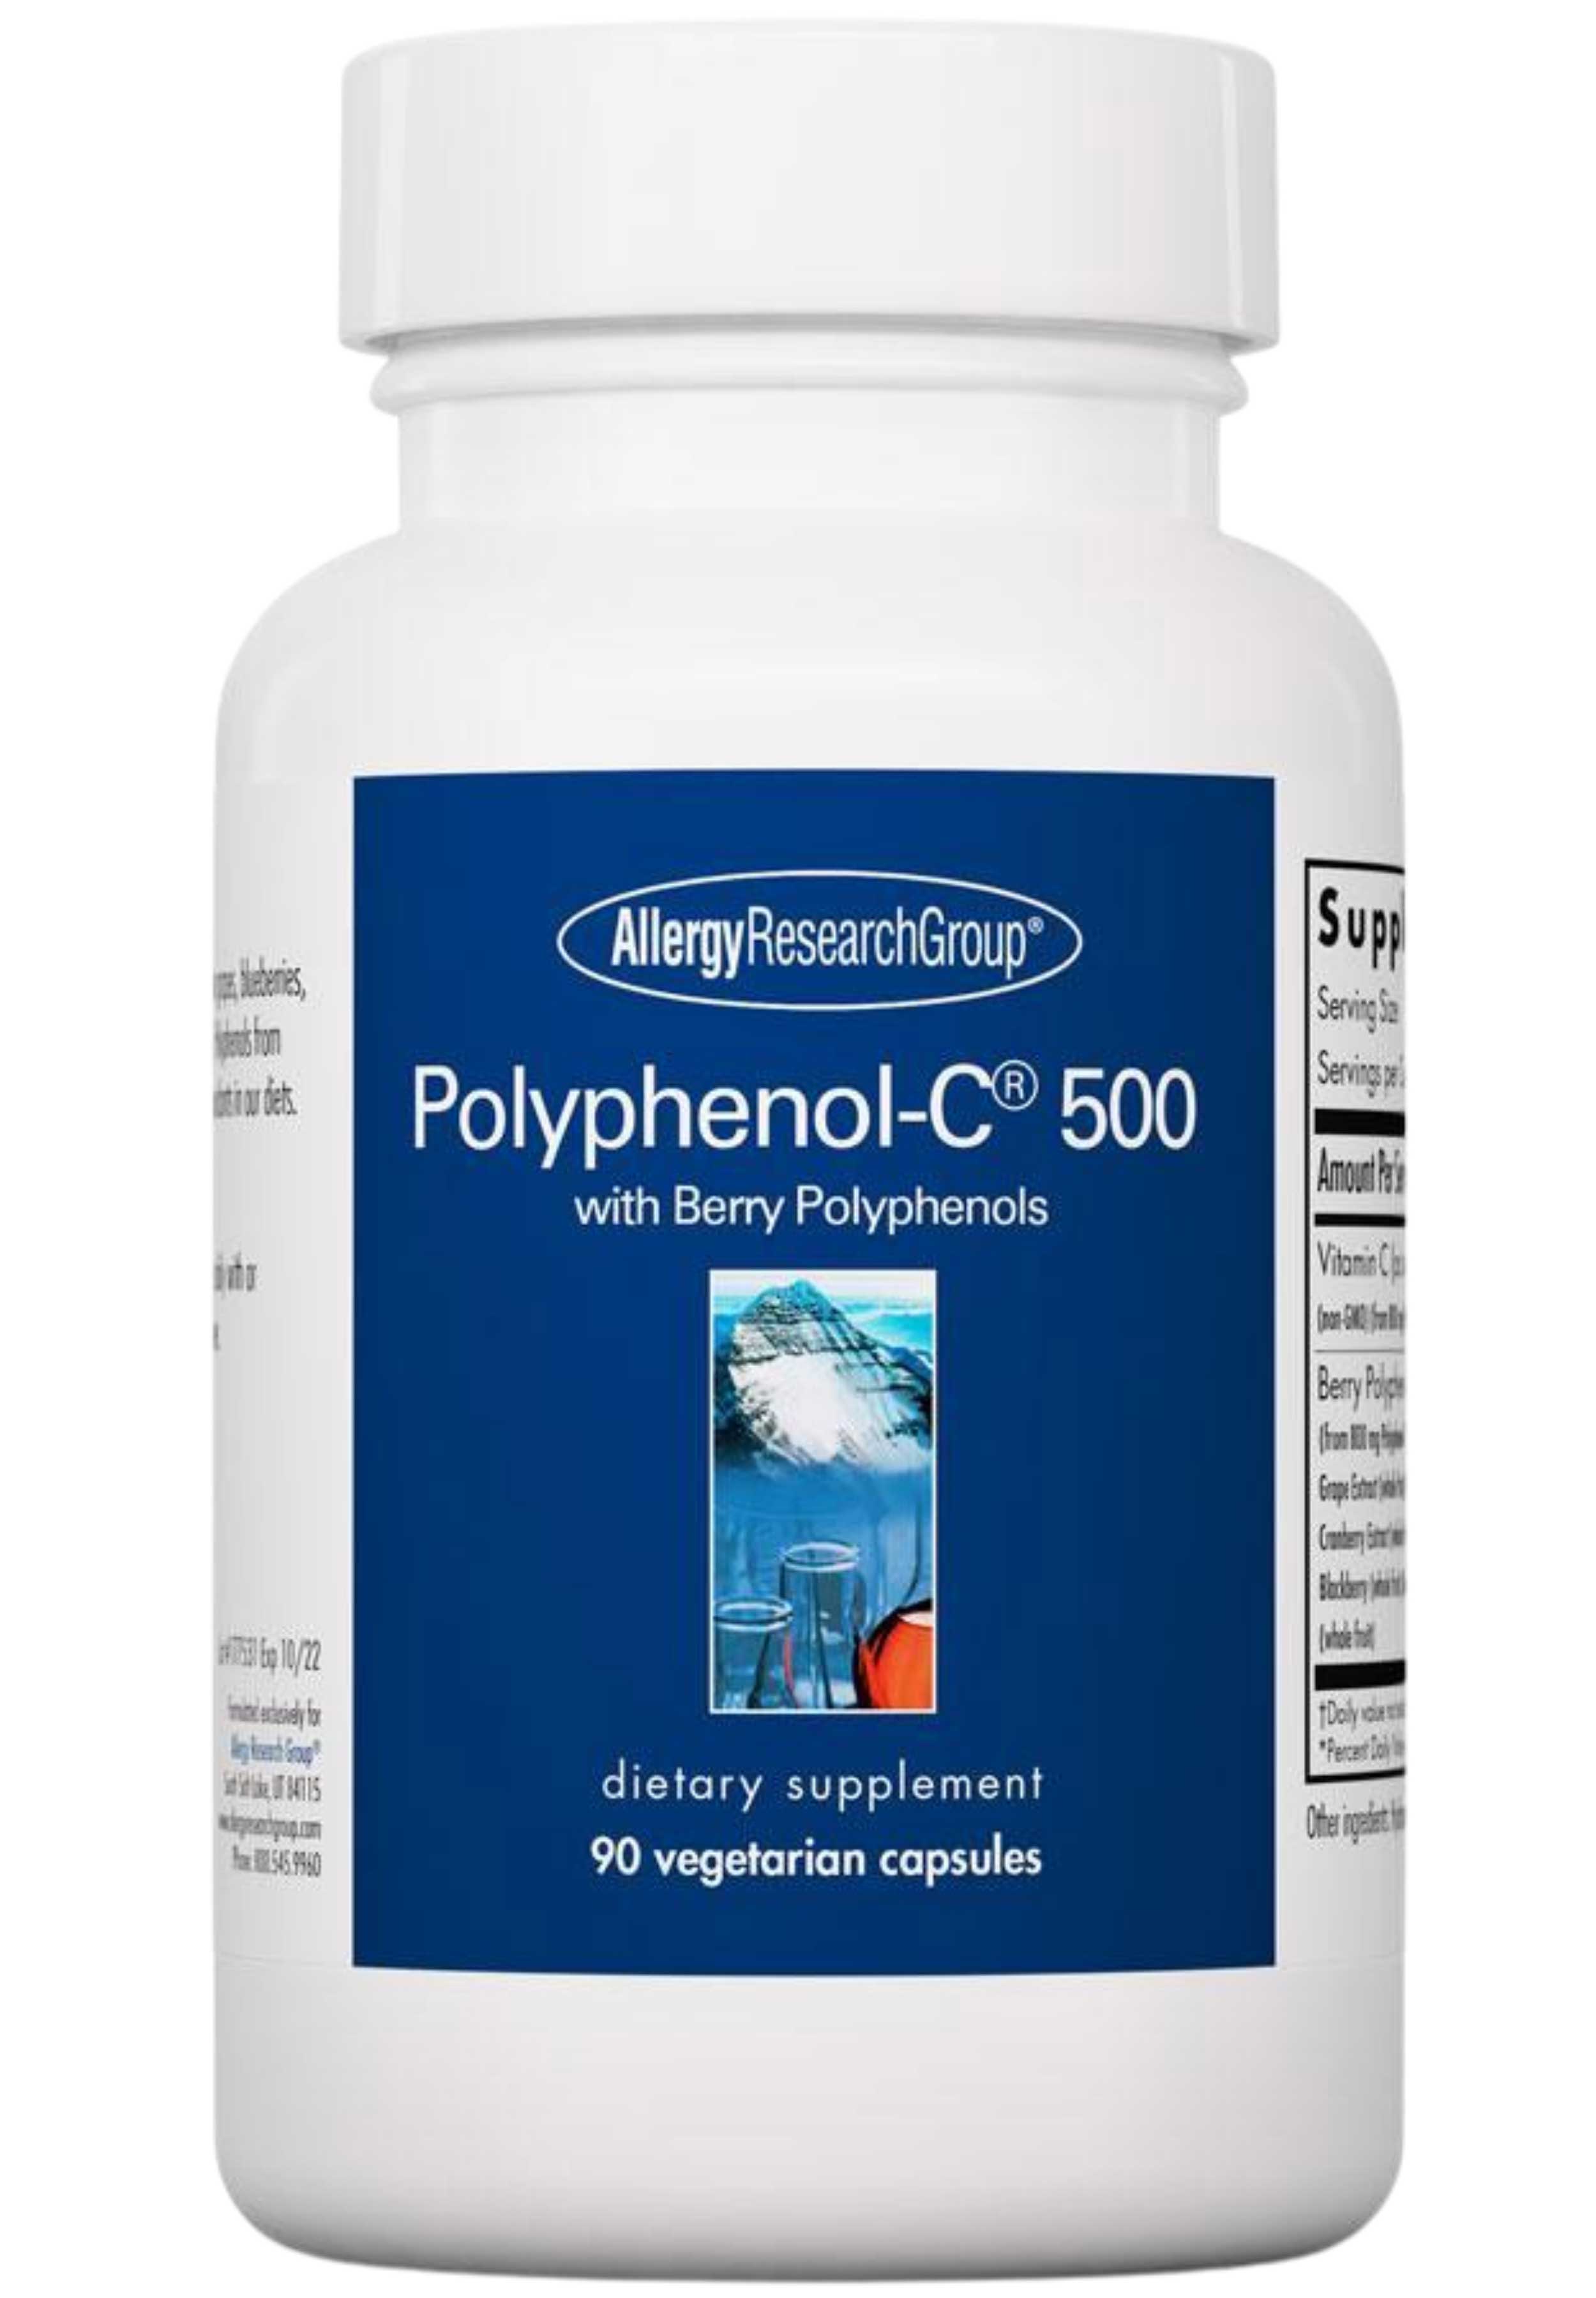 Allergy Research Group Polyphenol-C 500